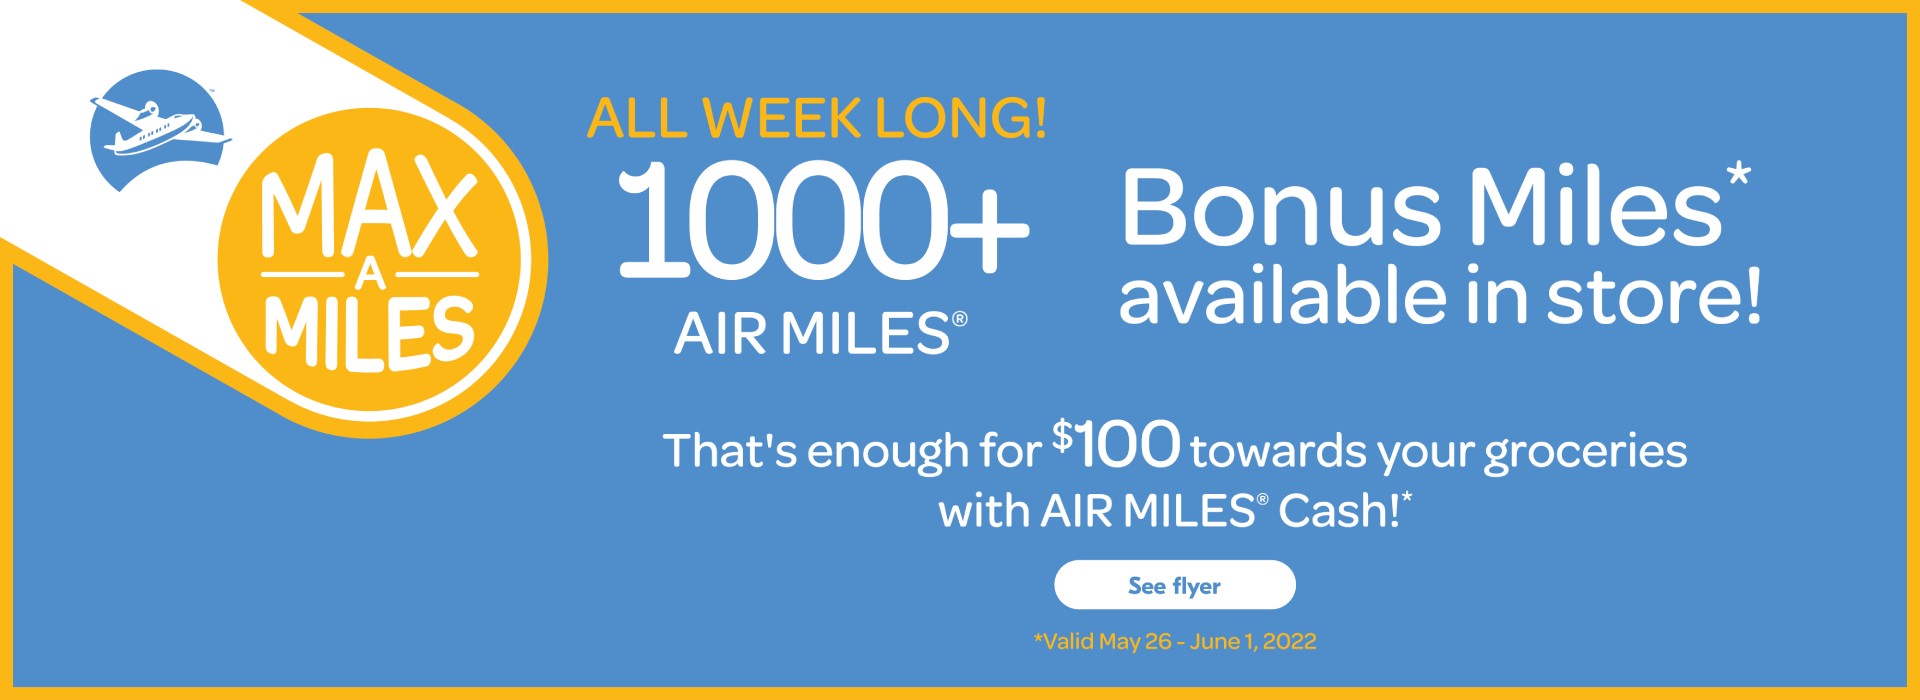 Text Reading 'МАХ A MILES ALL WEEK LONG! 1000+ Bonus Miles* available in store! Offer *Valid from May 26 - June 1, 2022. That's enough for $100 towards your groceries with AIR MILES® Cash!*.' For more information 'See flyer'.